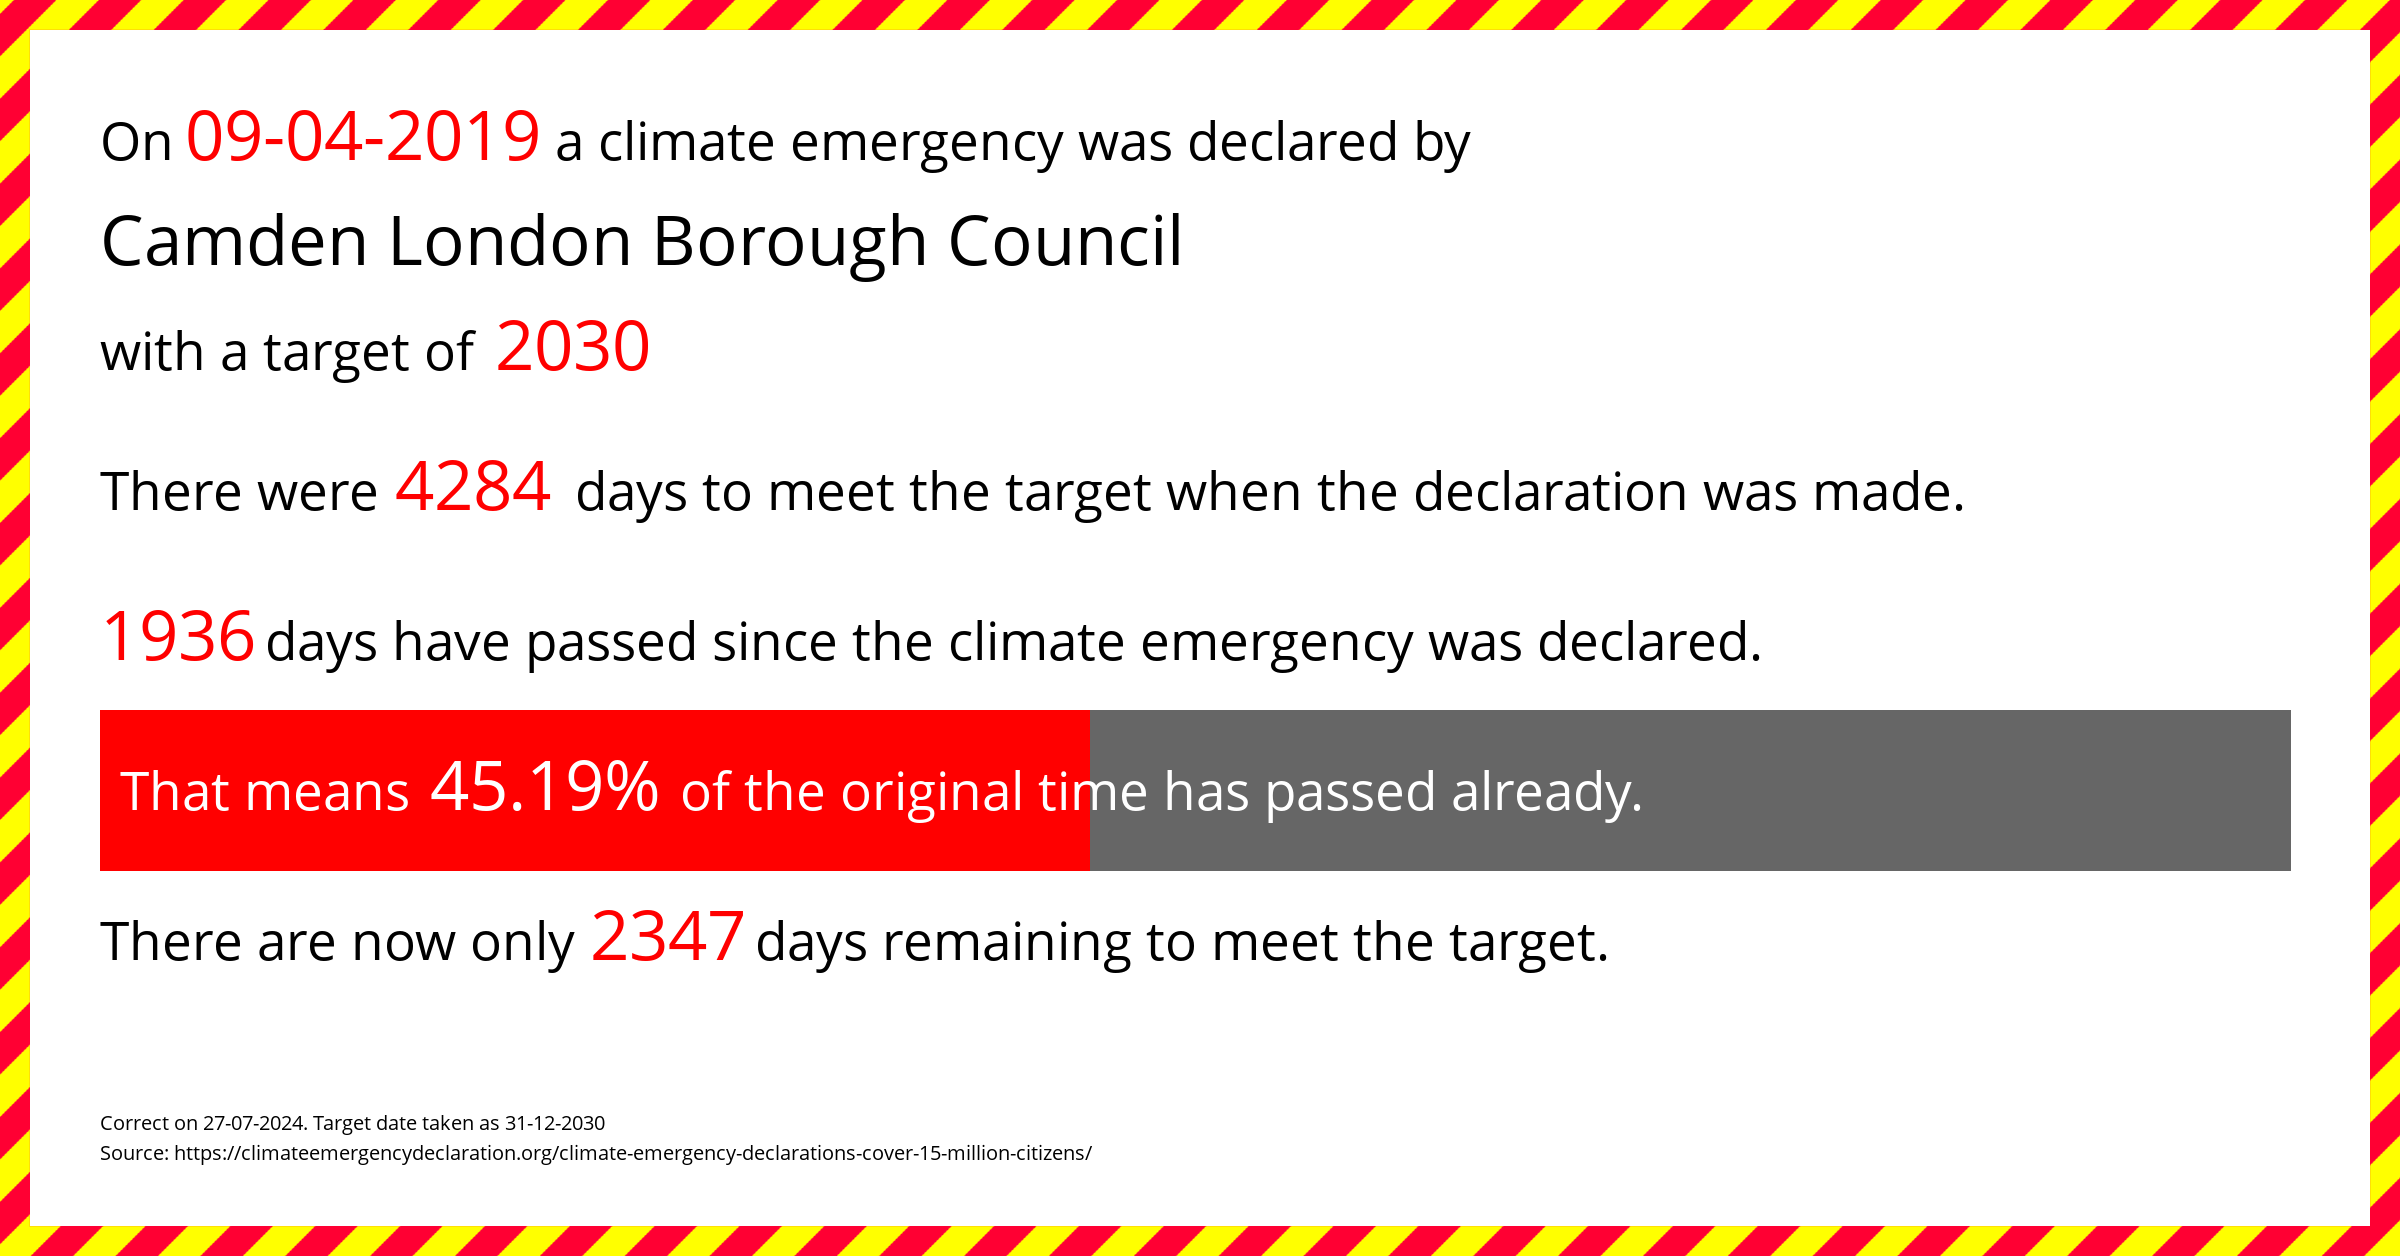 Camden London Borough Council declared a Climate emergency on Tuesday 9th April 2019, with a target of 2030.